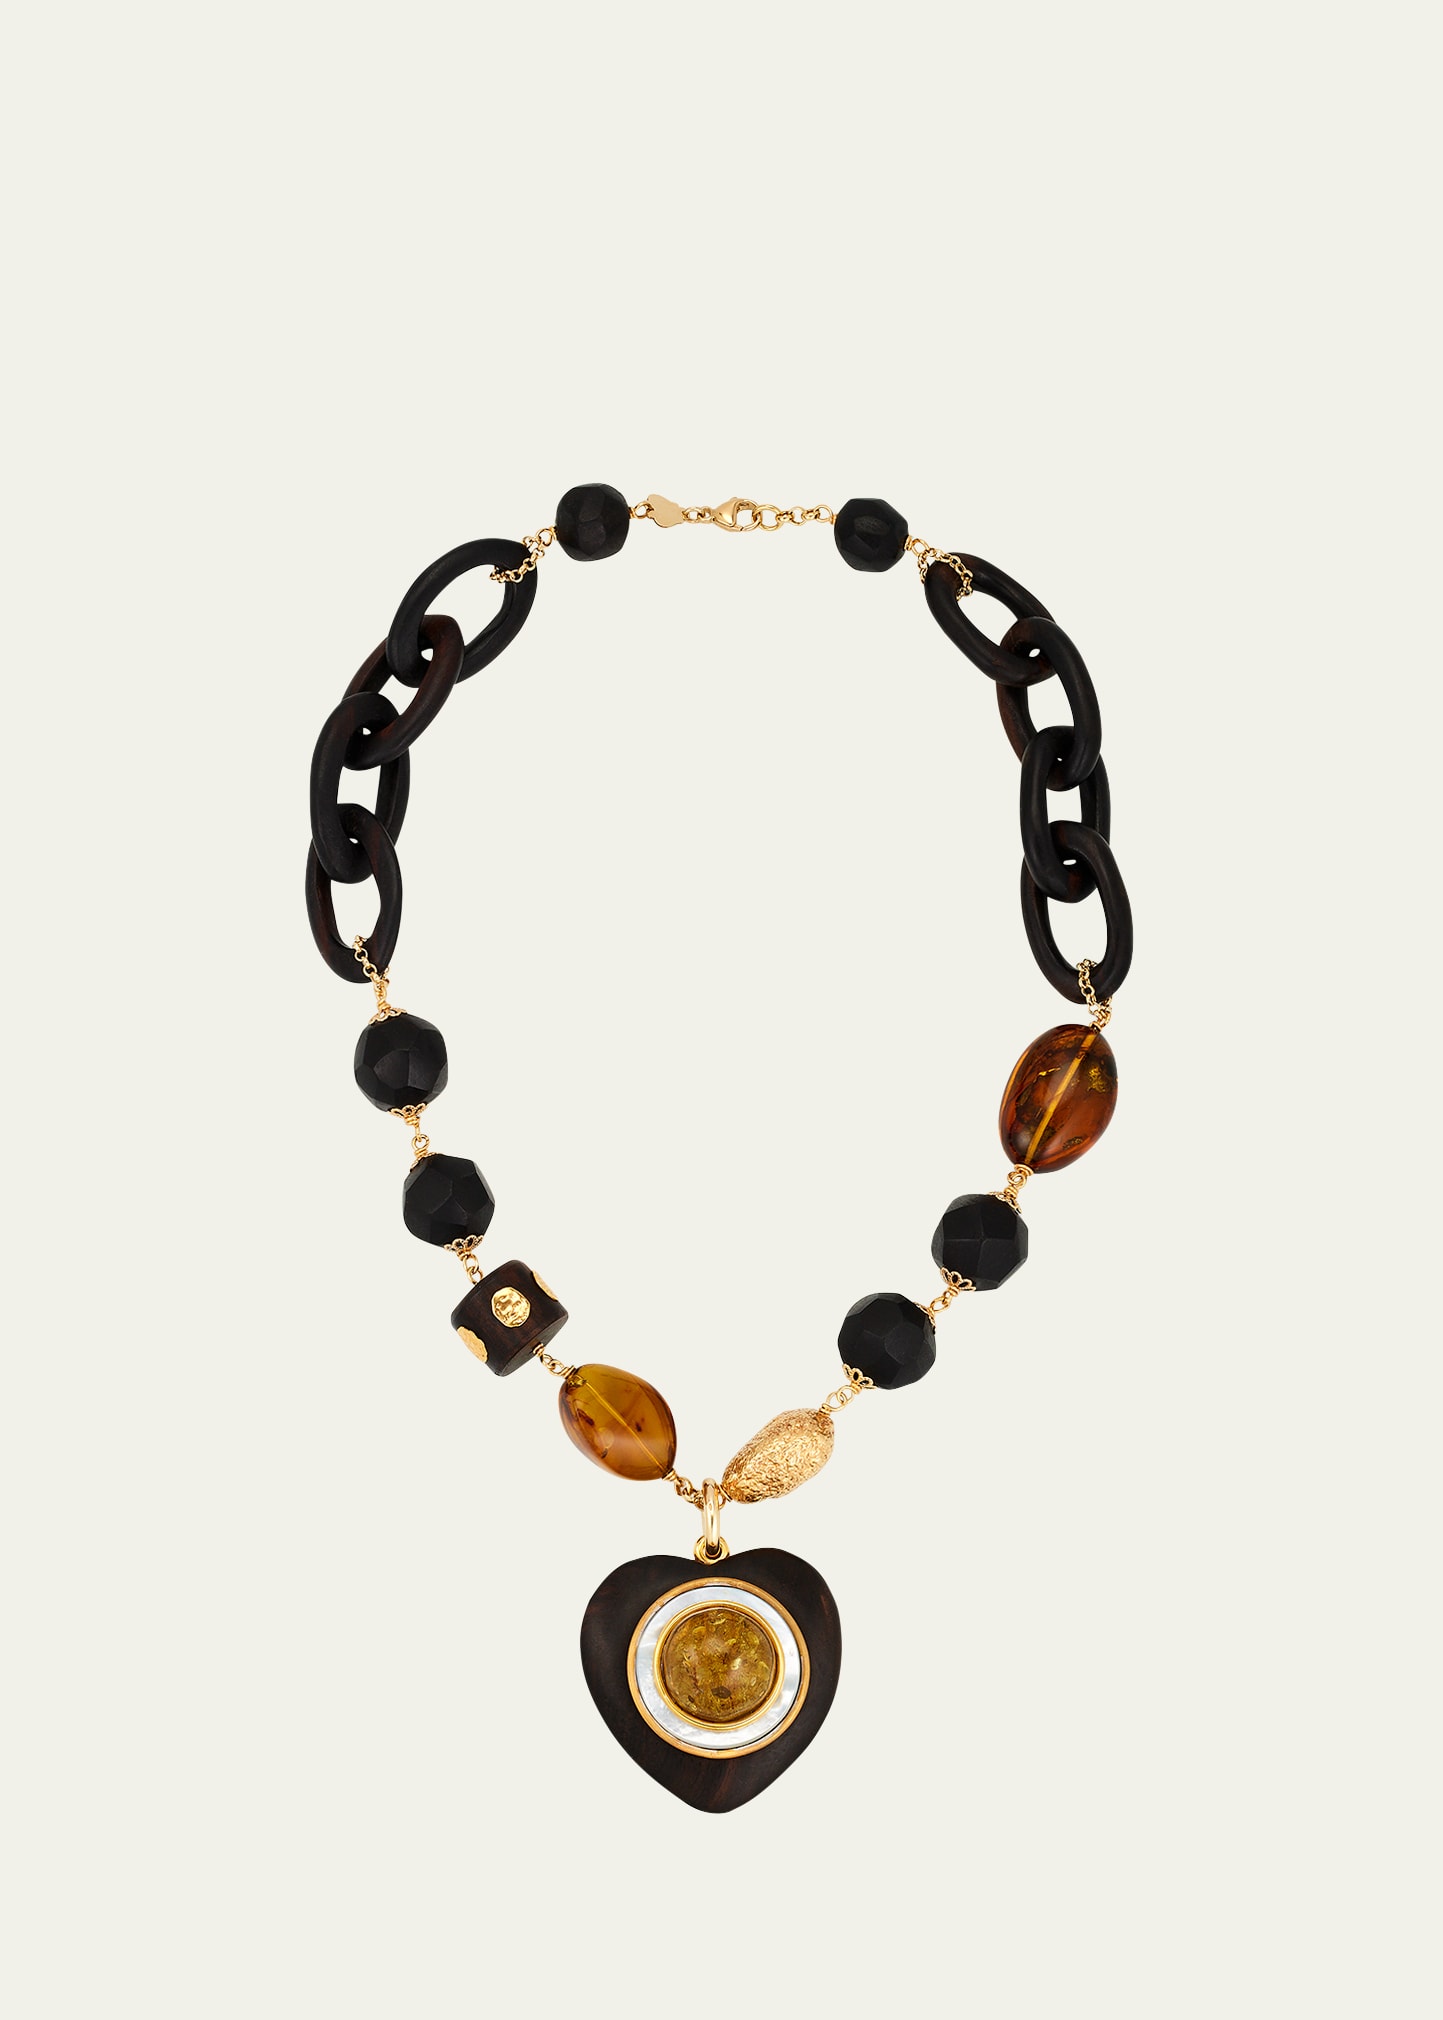 Ebony Heart Necklace with Amber and Mother of Pearl